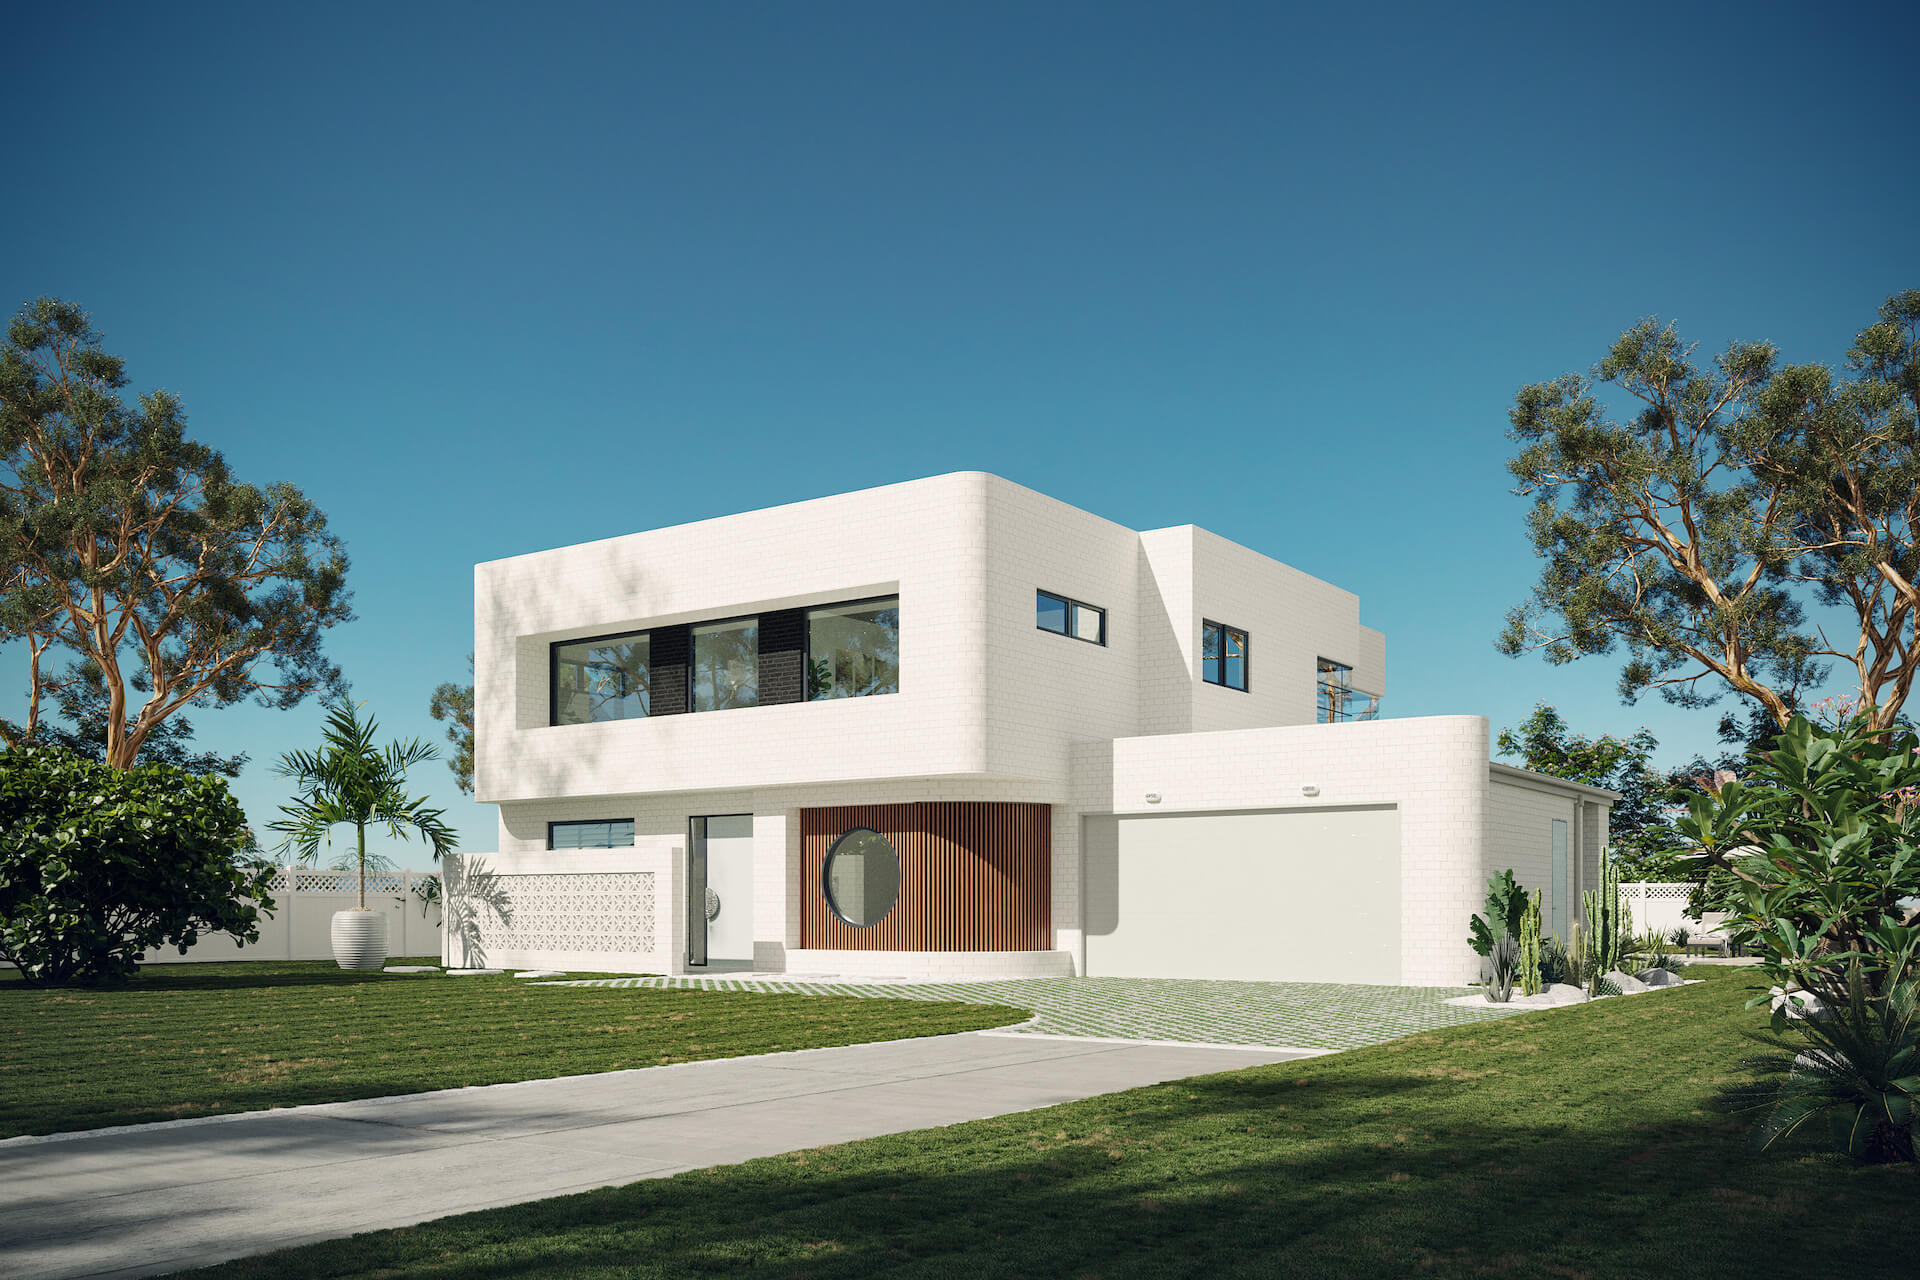 Photorealistic 3D Exterior Render of a Stylish House